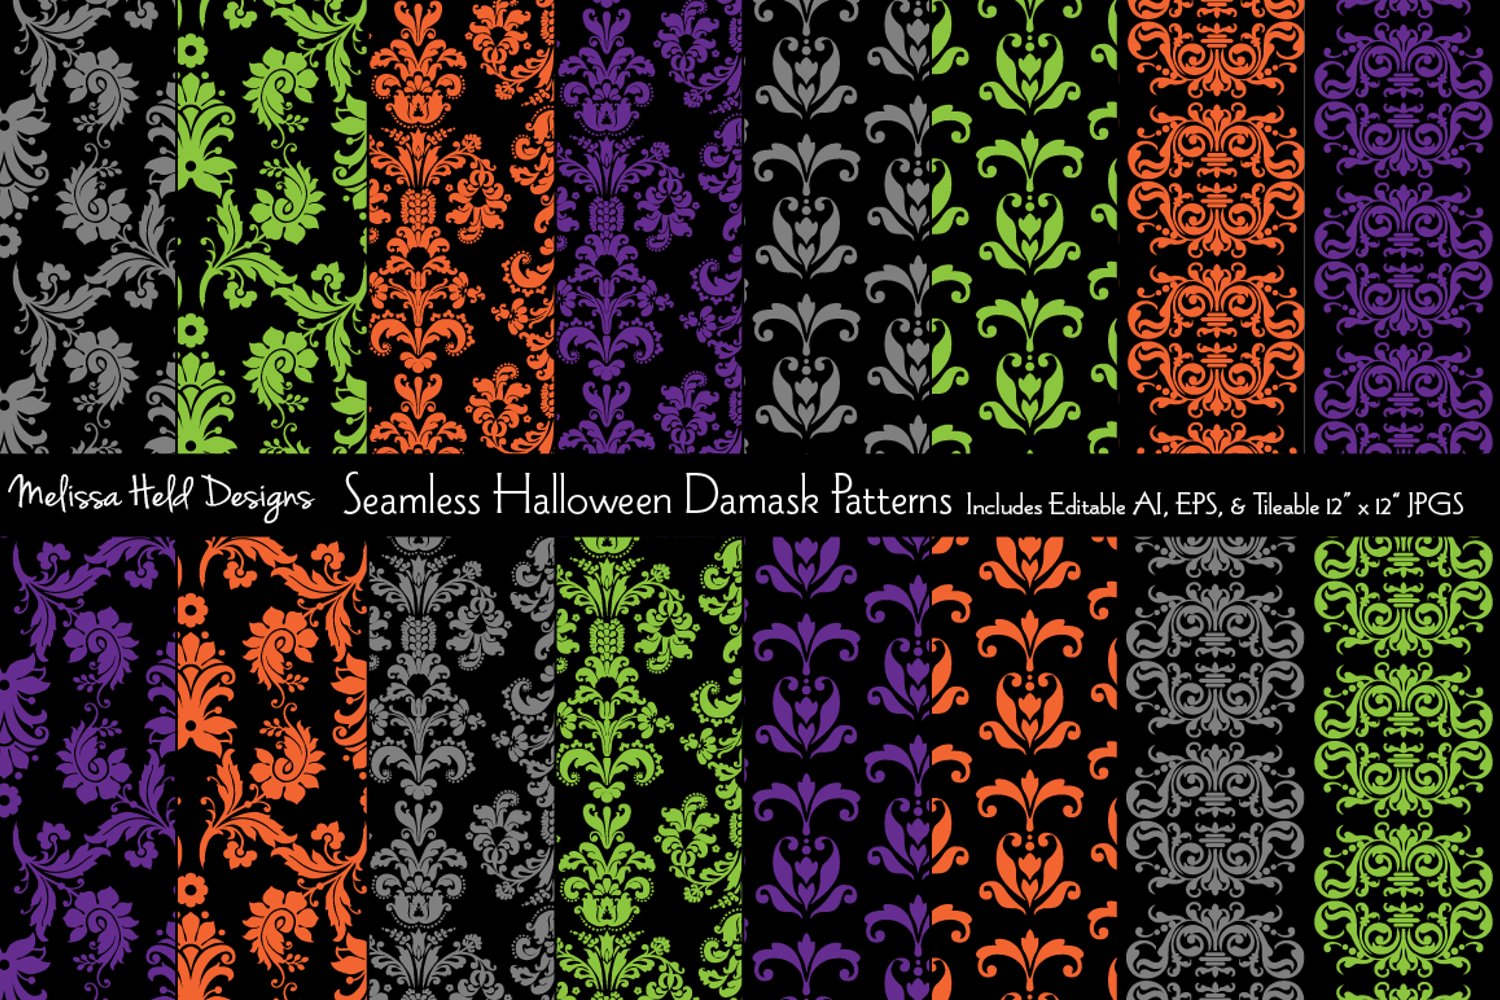 Cover image of Seamless Halloween Damask Patterns.